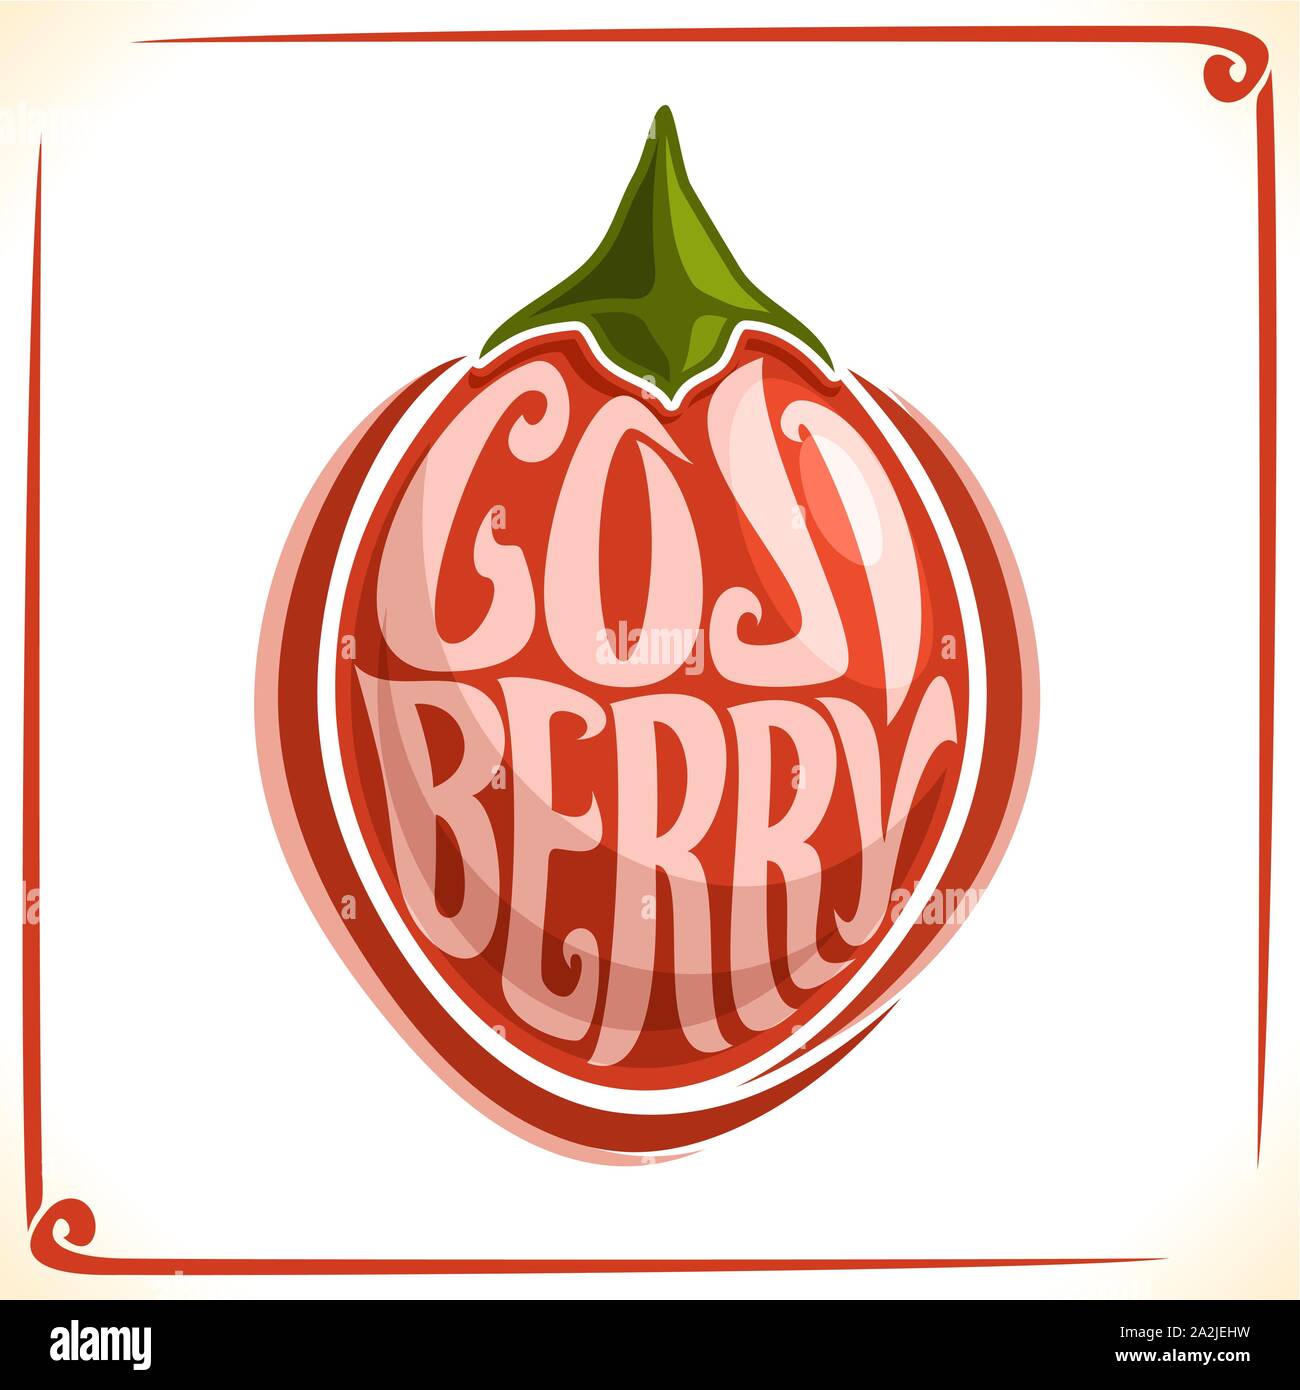 Vector logo for Goji Berry, label with one whole berry for package of fresh juice or hot drink, price tag with original font for words goji berry insc Stock Vector